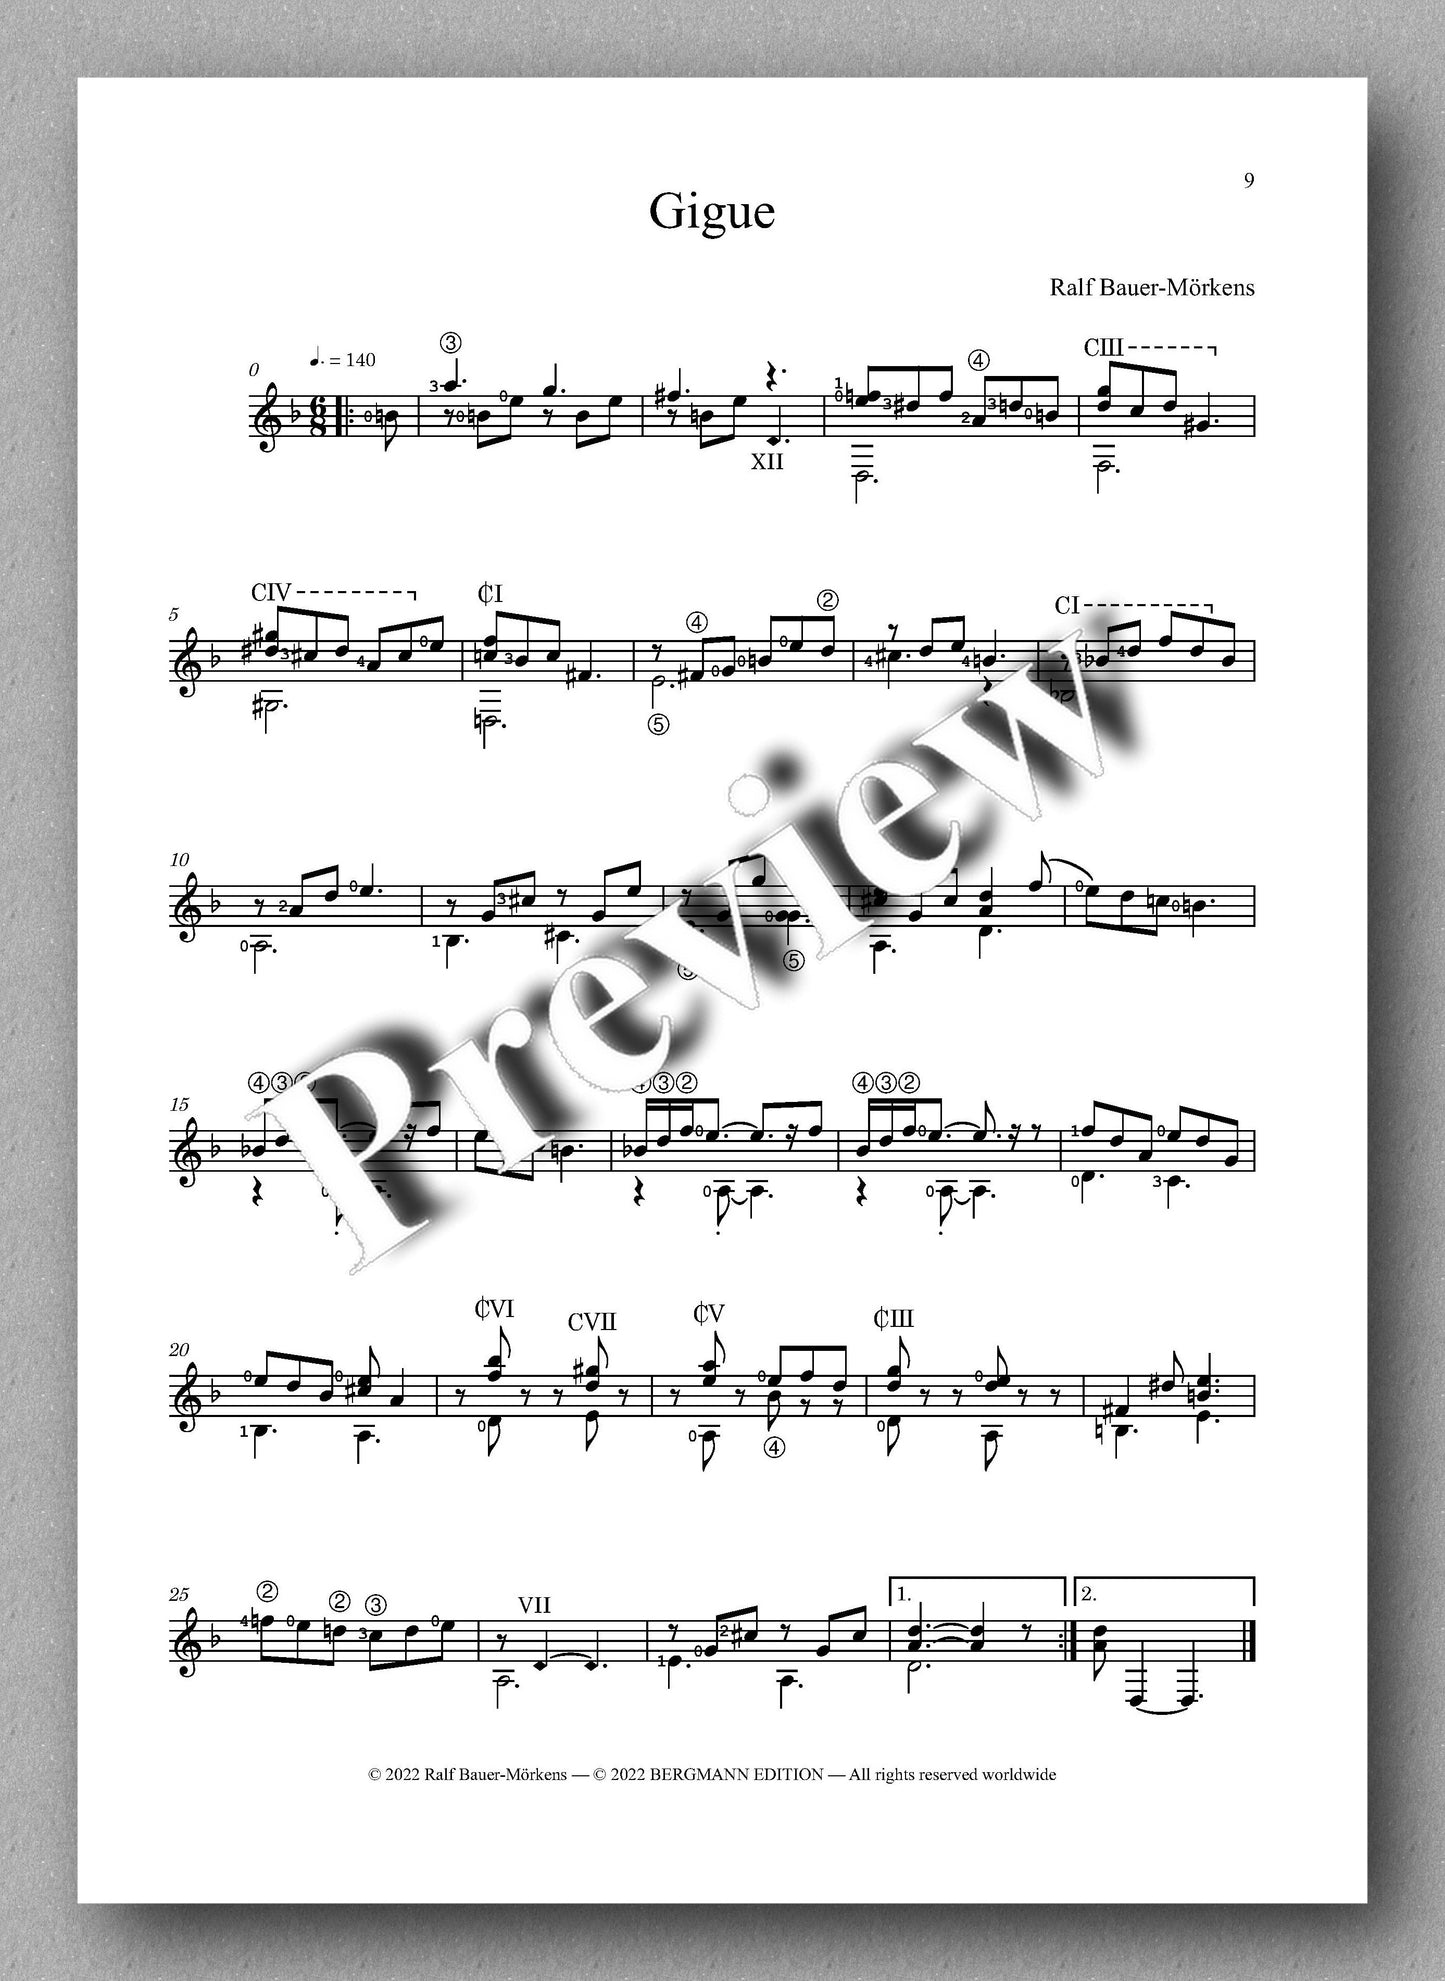 Ralf Bauer-Mörkens, Suite in d-minor - preview of the music score 3